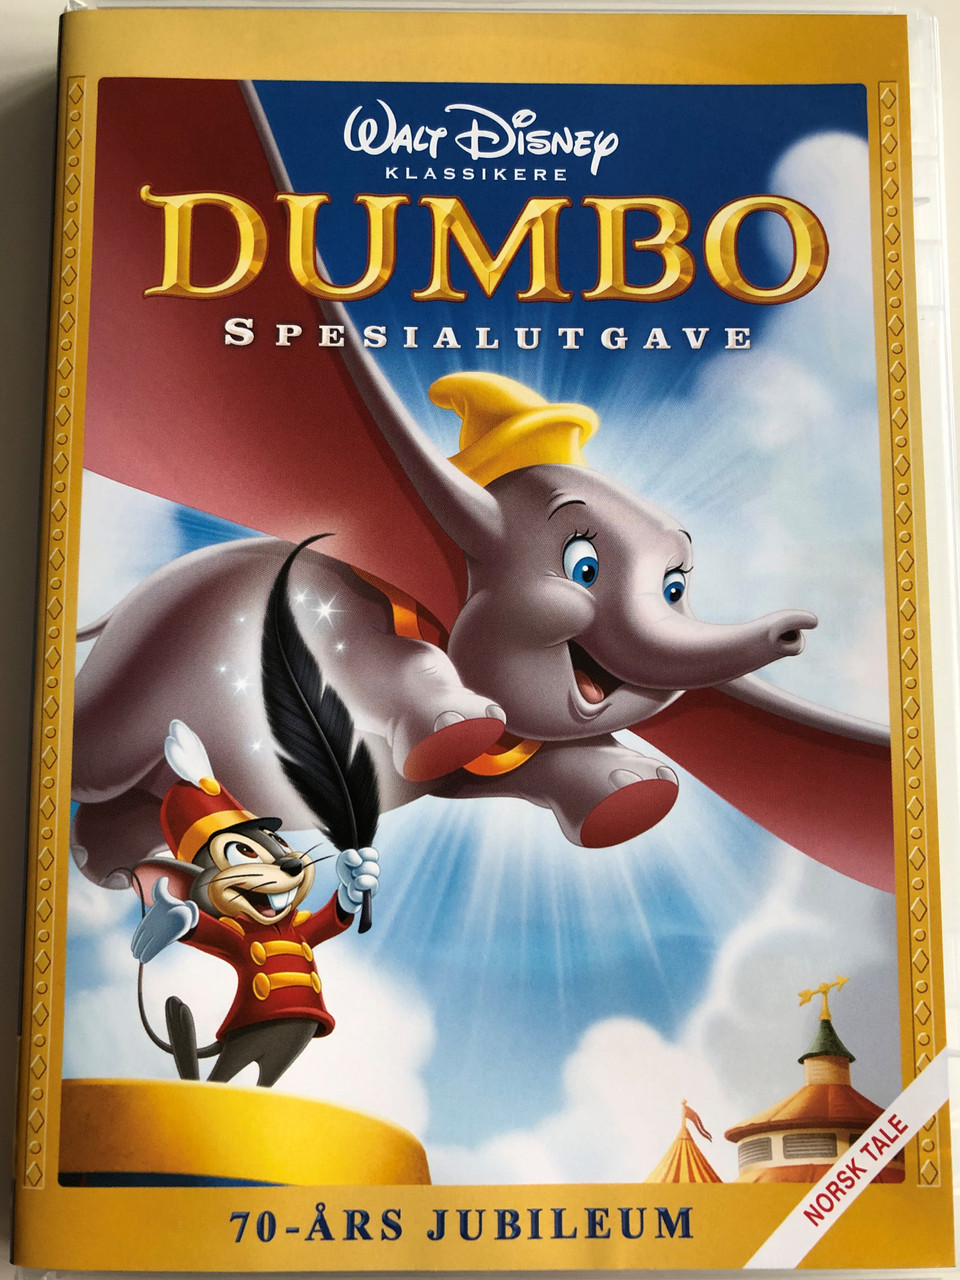 Dumbo Special Edition DVD 1941 Spesialutgave / 70-Ars Jubileum / Norwegian  Edition / Directed by Ben Sharpsteen / Starring: Edward Brophy, Herman  Bing, Margaret Wright, Sterling Holloway - Bible in My Language